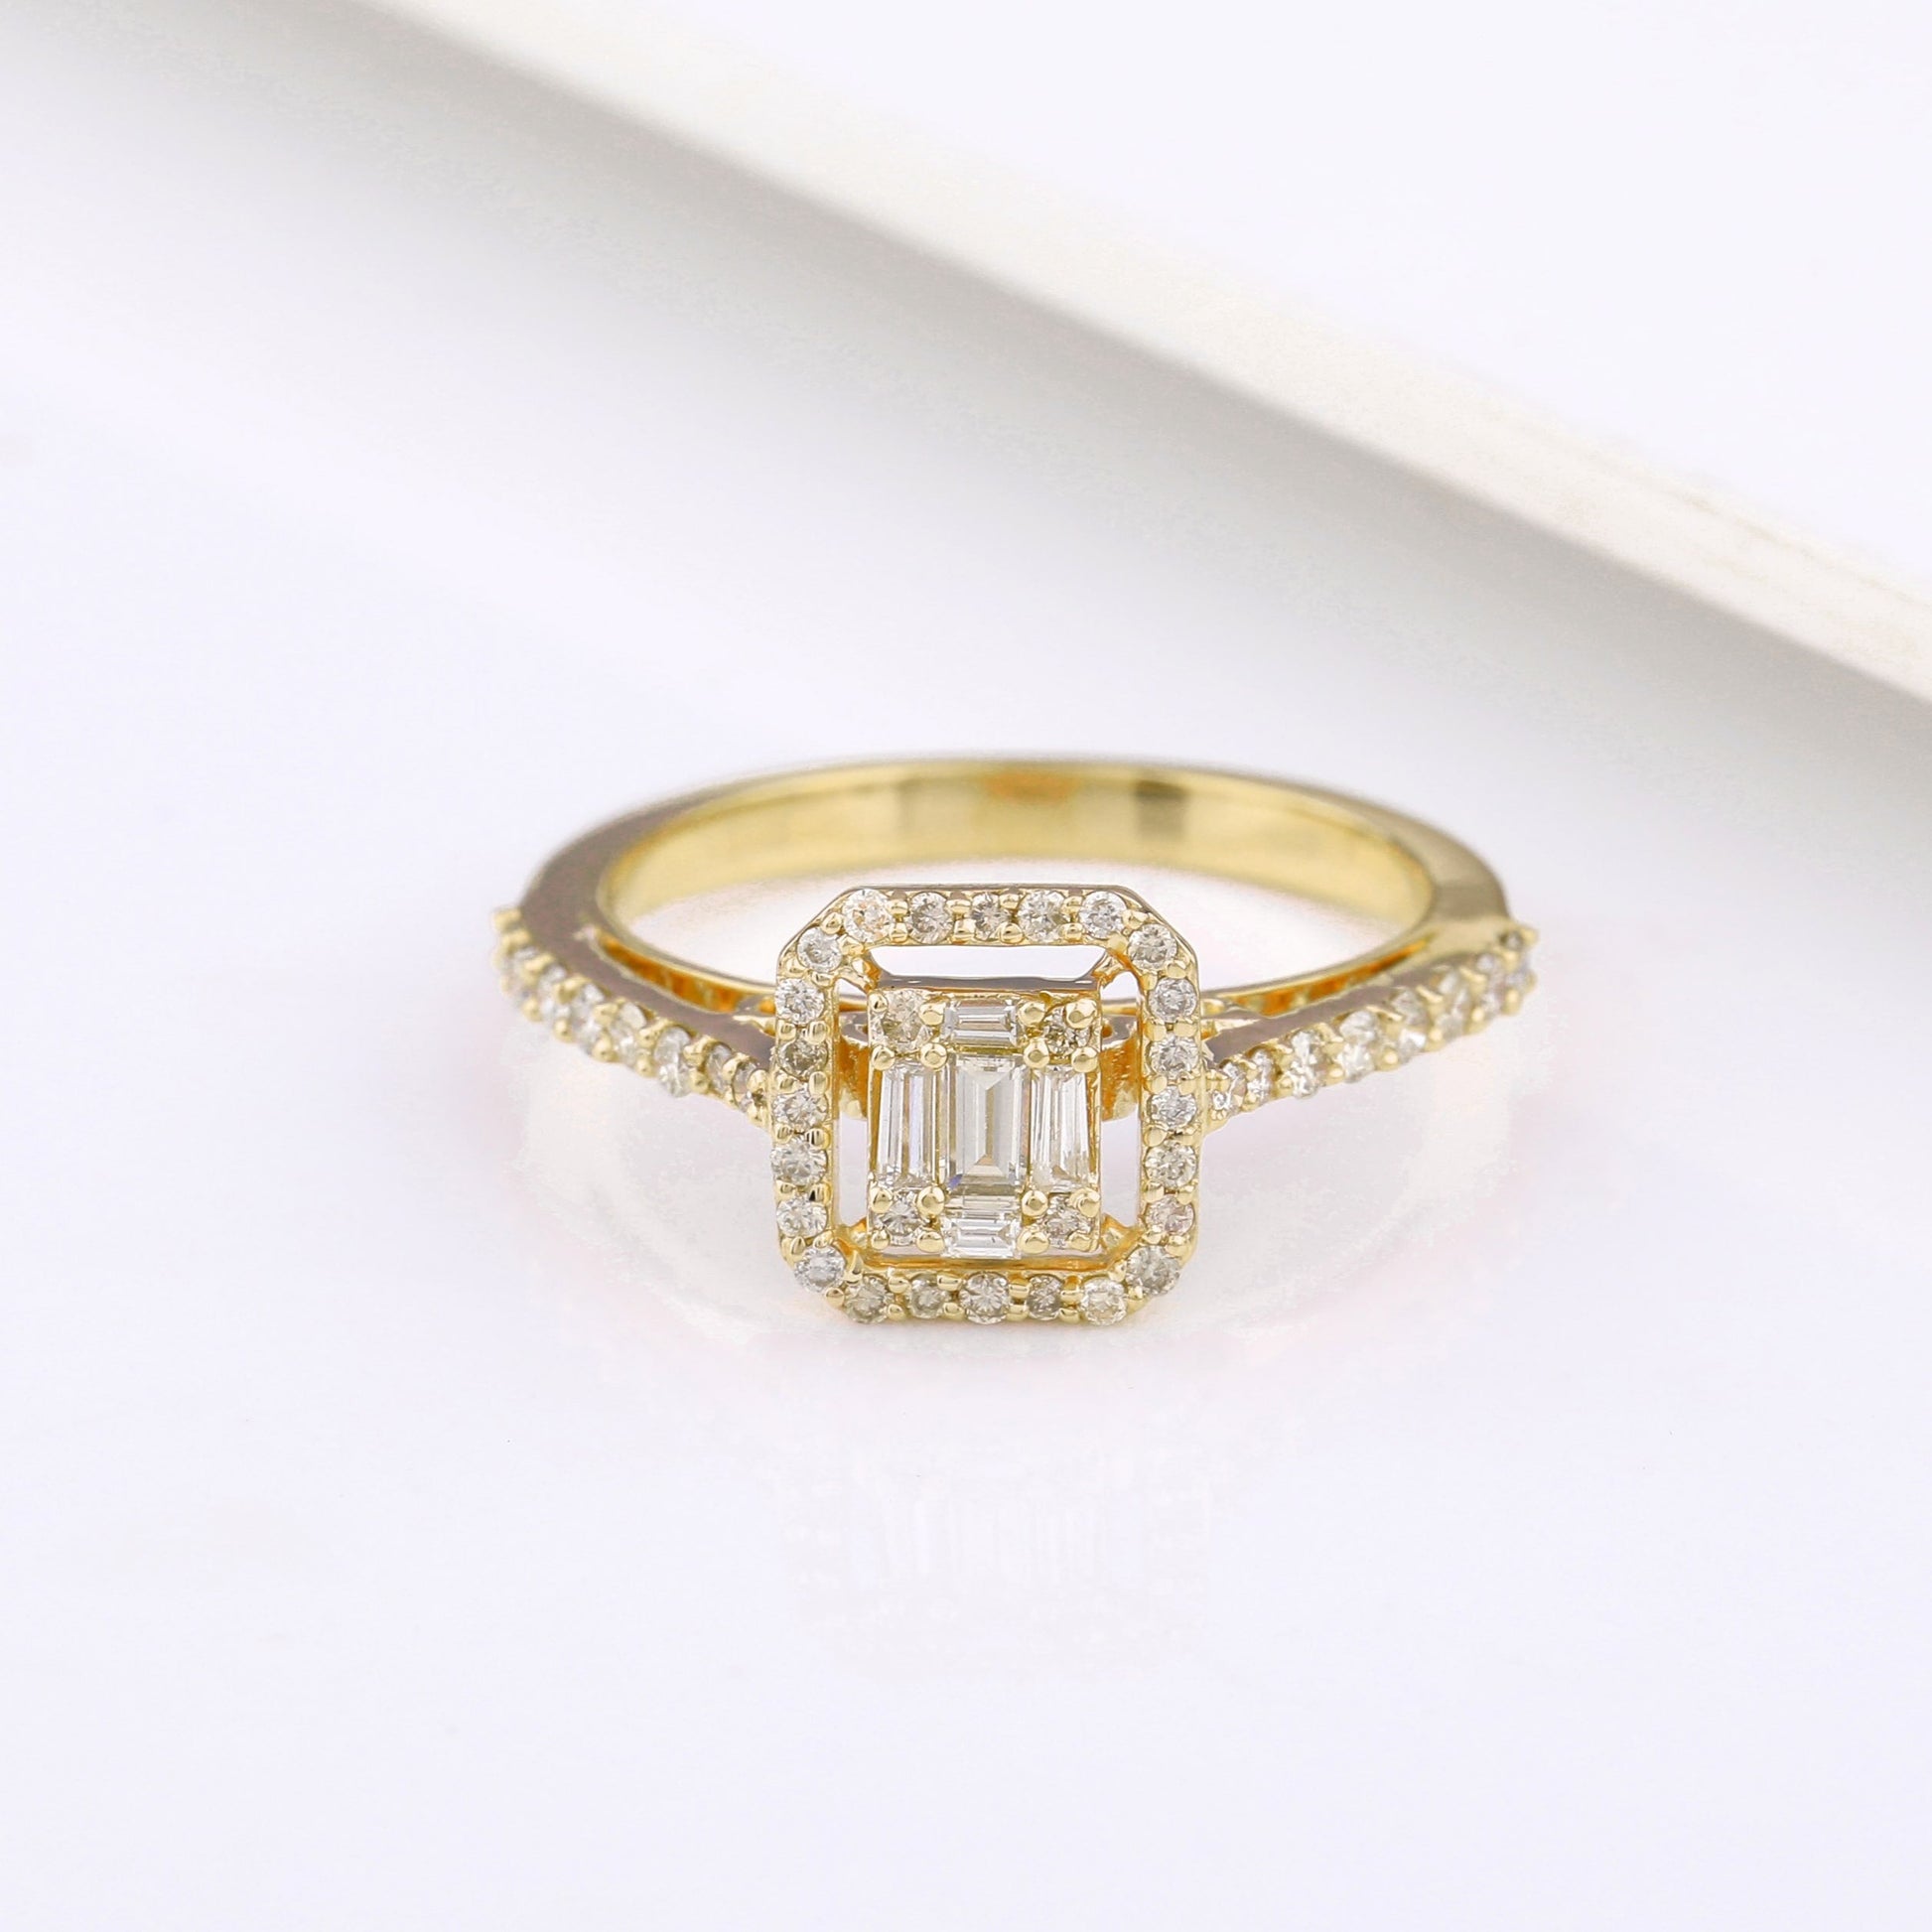 Square Baguette Halo Diamond Ring in Yellow Gold